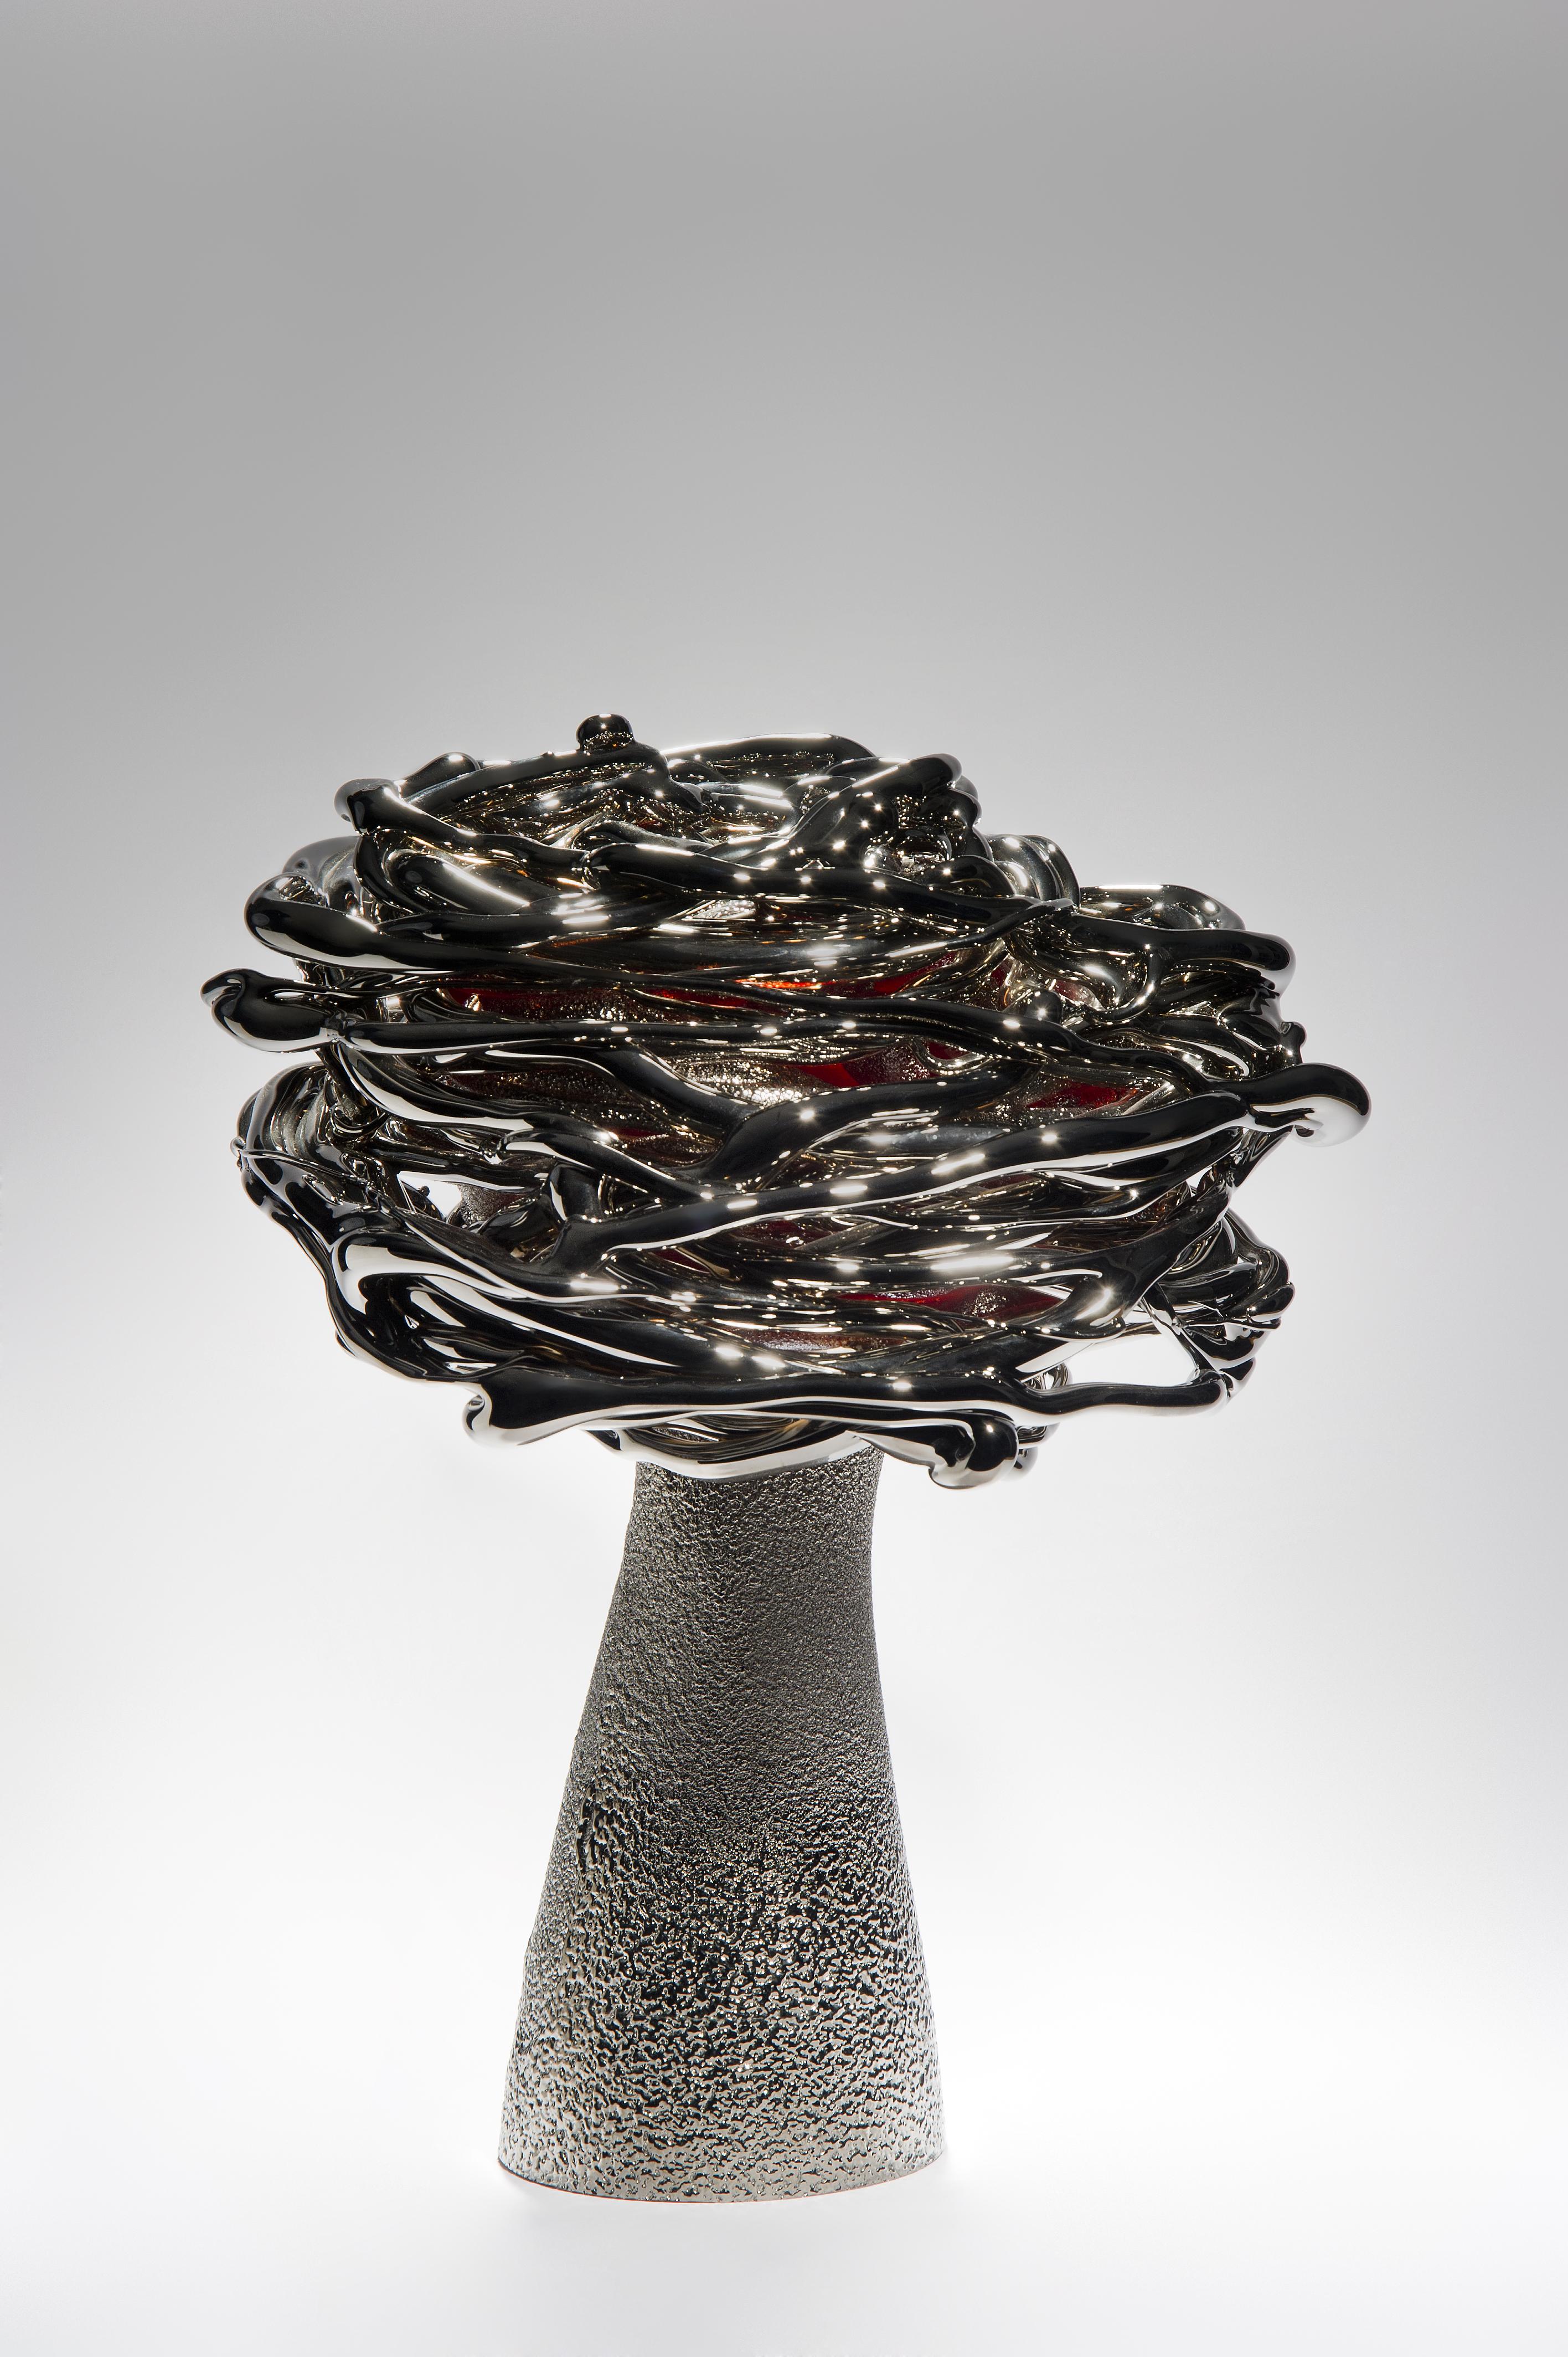 Shining at night, is a unique platinum and glass stylised tree sculpture by the Lithuanian artist Remigijus Kriukas. Glass is blown and hot sculpted to create this substantial artwork, the final piece is finished with a fine coating of